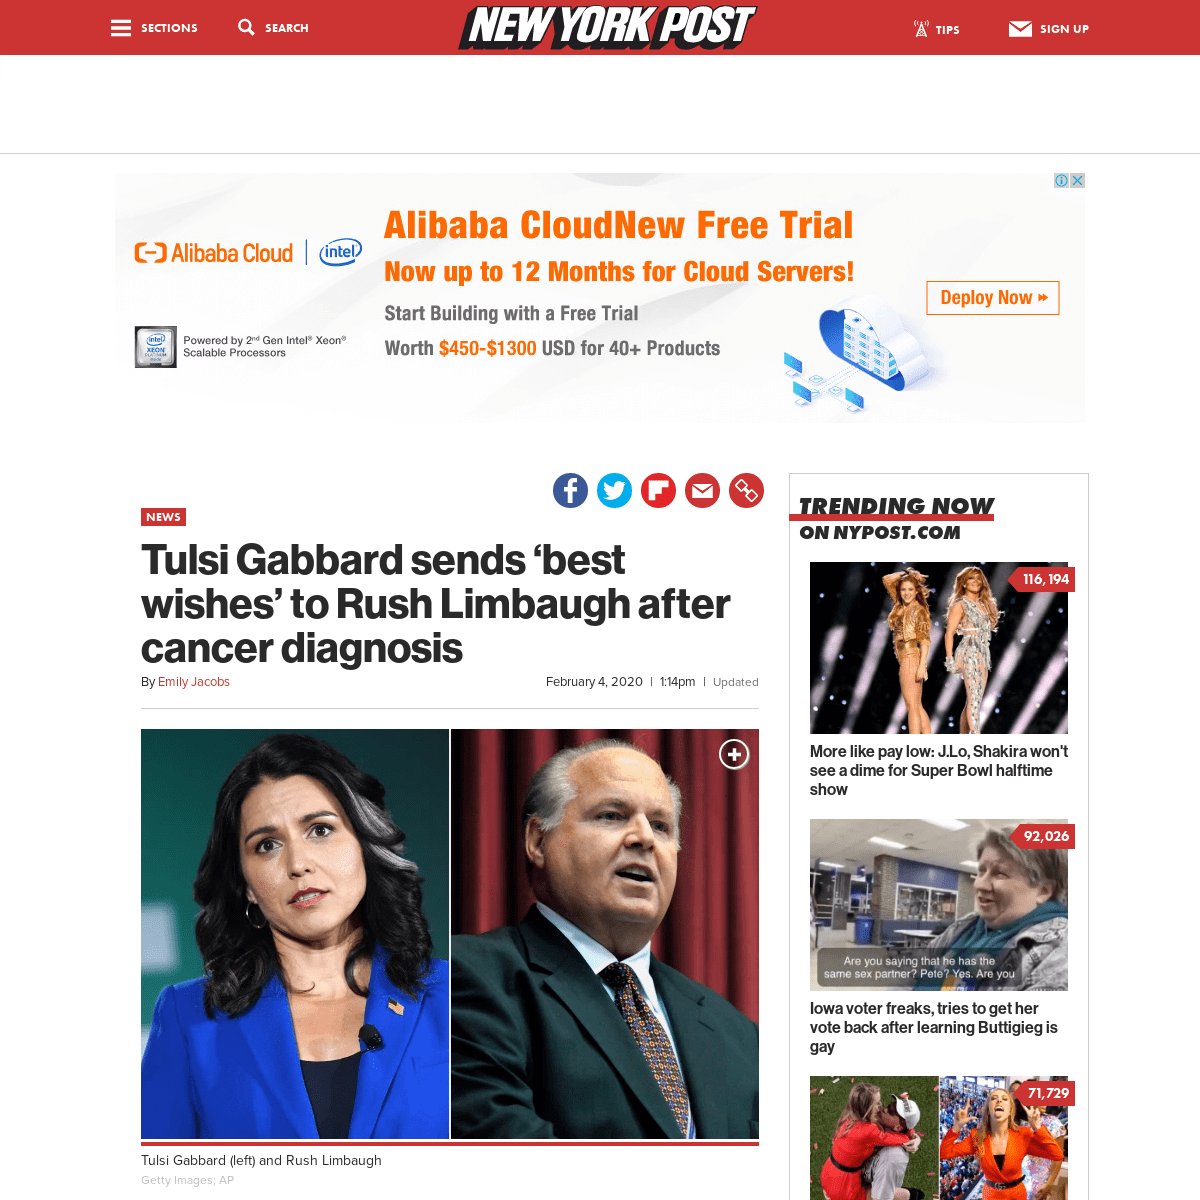 A complete backup of nypost.com/2020/02/04/tulsi-gabbard-sends-best-wishes-to-rush-limbaugh-after-cancer-diagnosis/